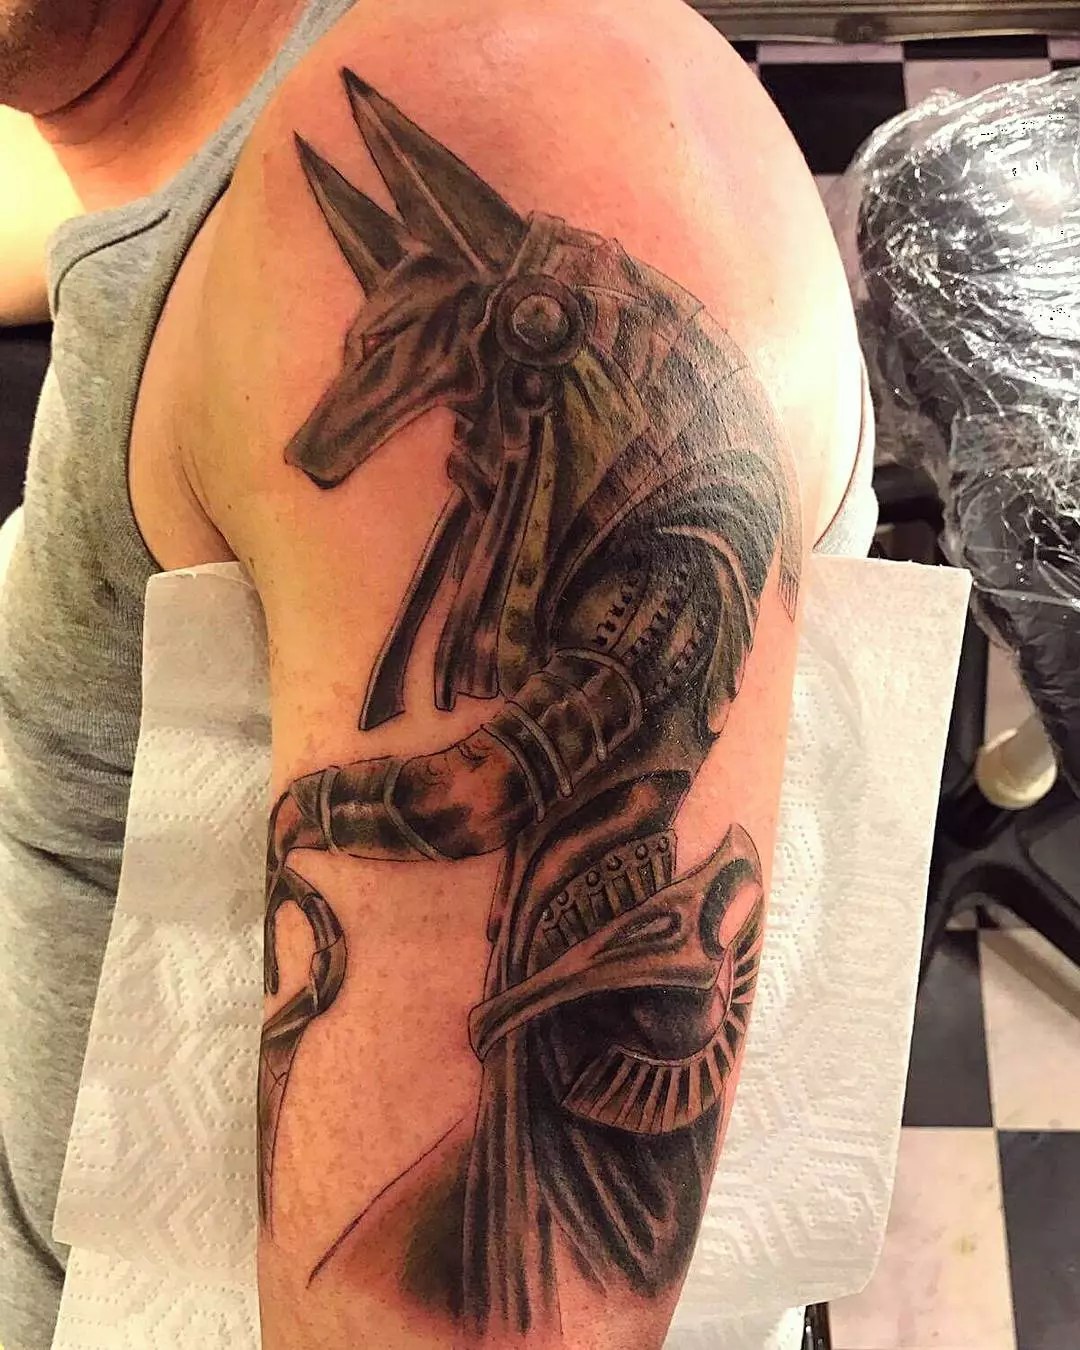 What Does Anubis's Tattoo Mean? A Look into the Meaning and Symbolism of Anubis Tattoos